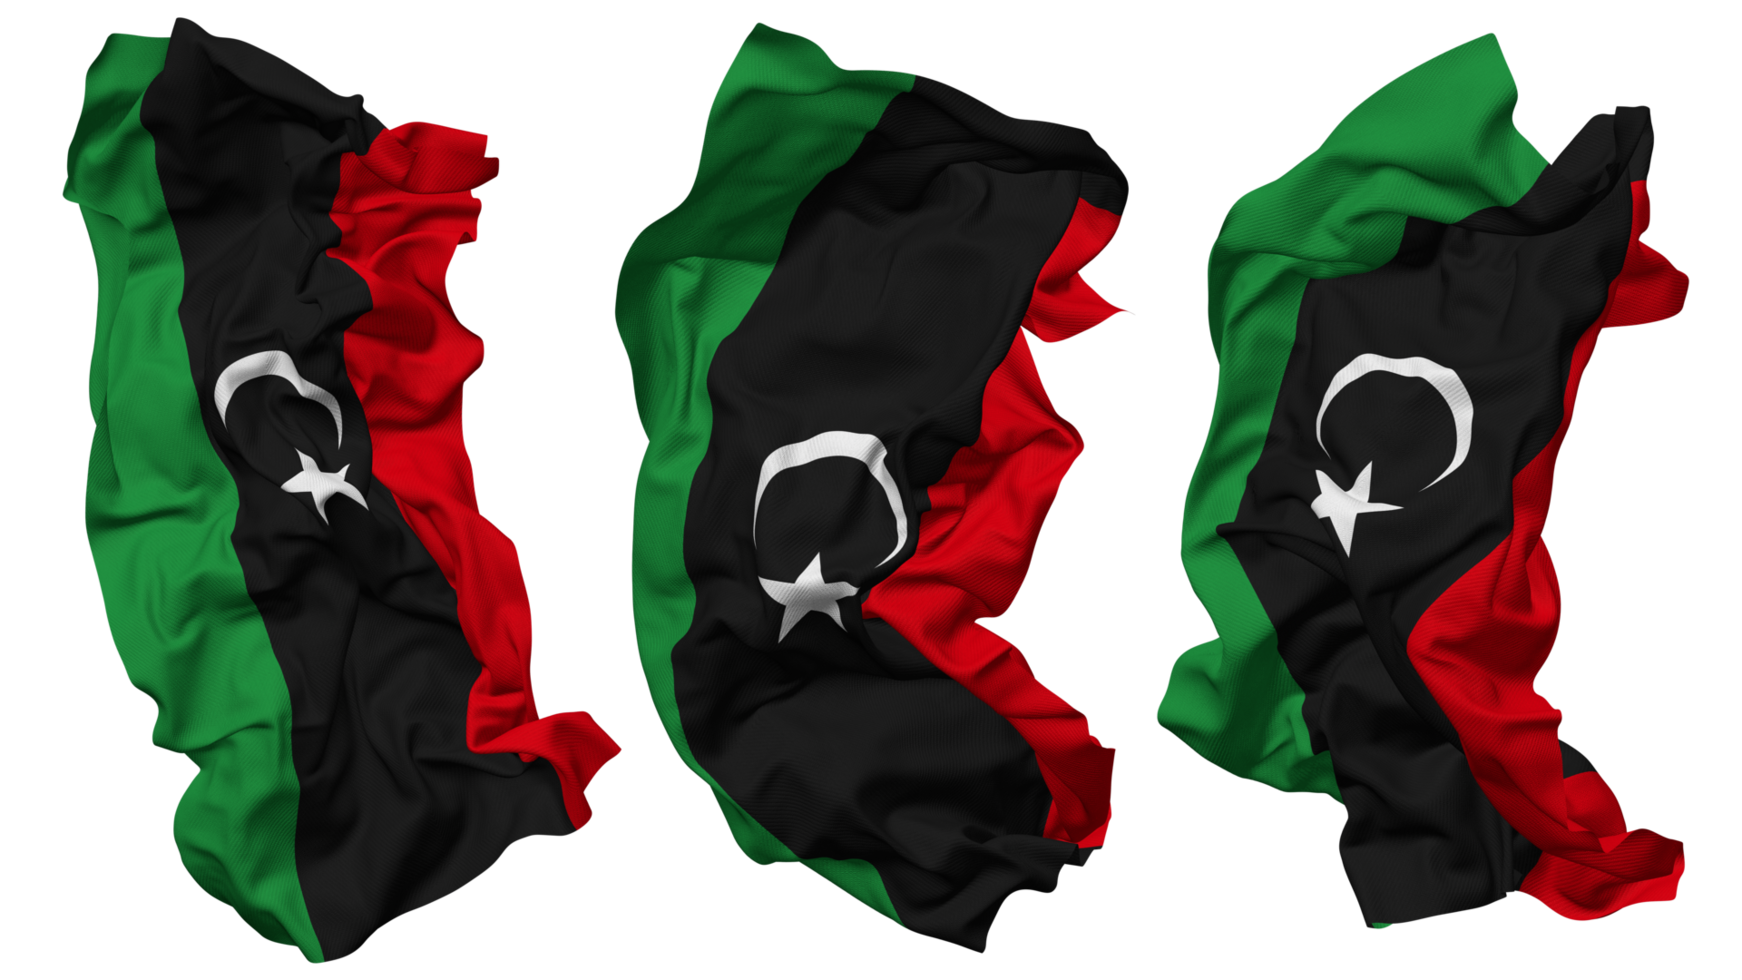 Libya Flag Waves Isolated in Different Styles with Bump Texture, 3D Rendering png